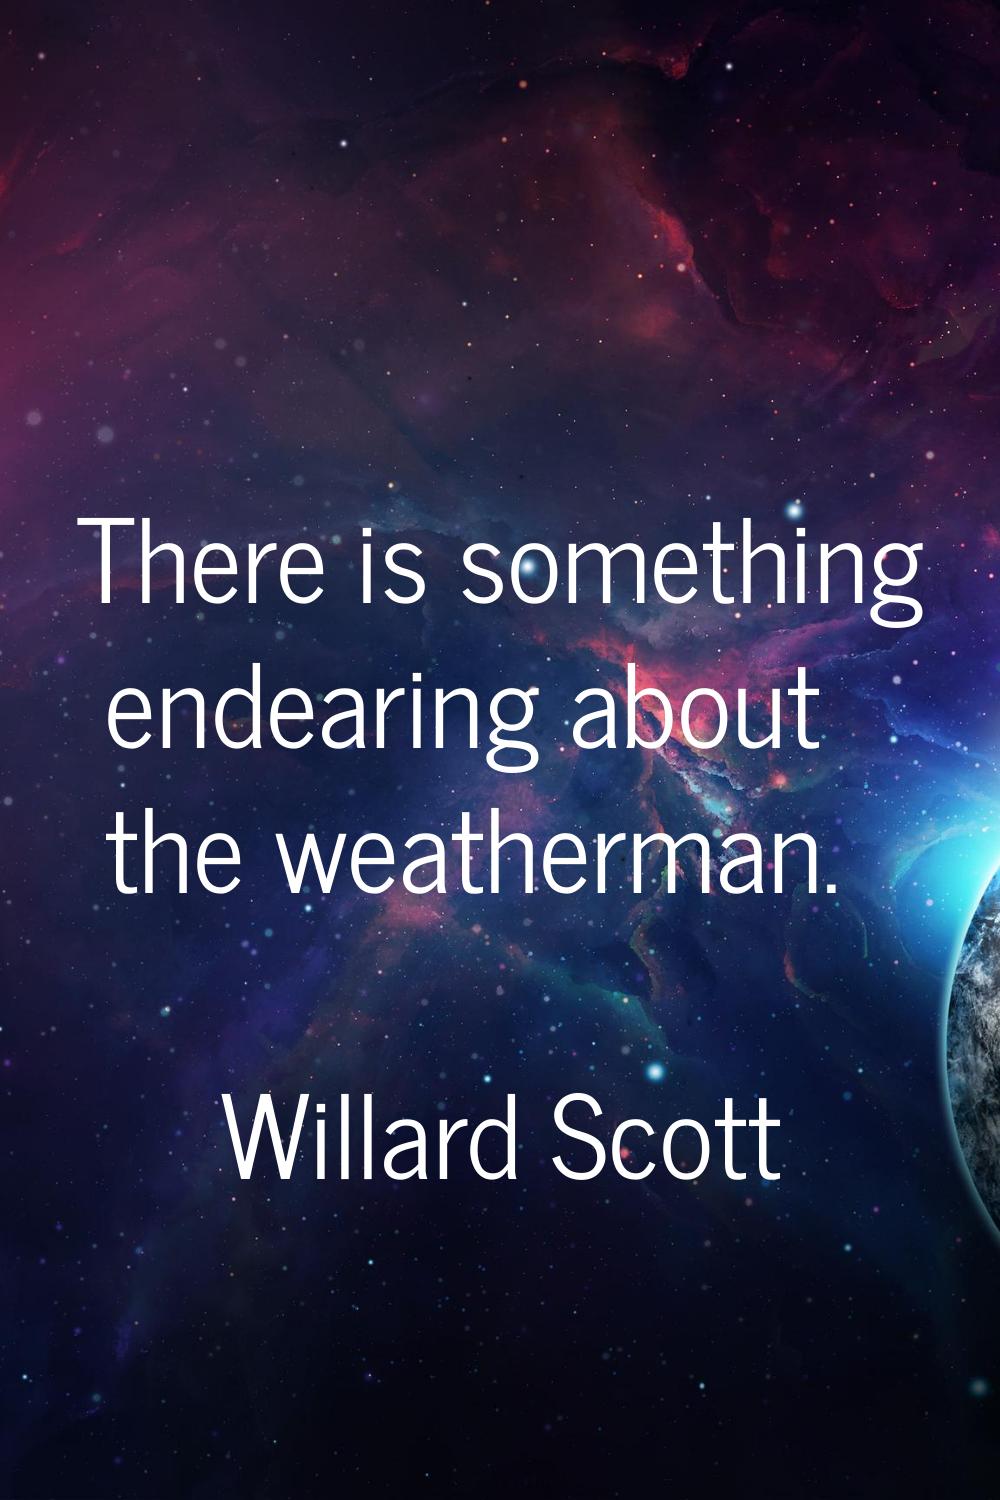 There is something endearing about the weatherman.